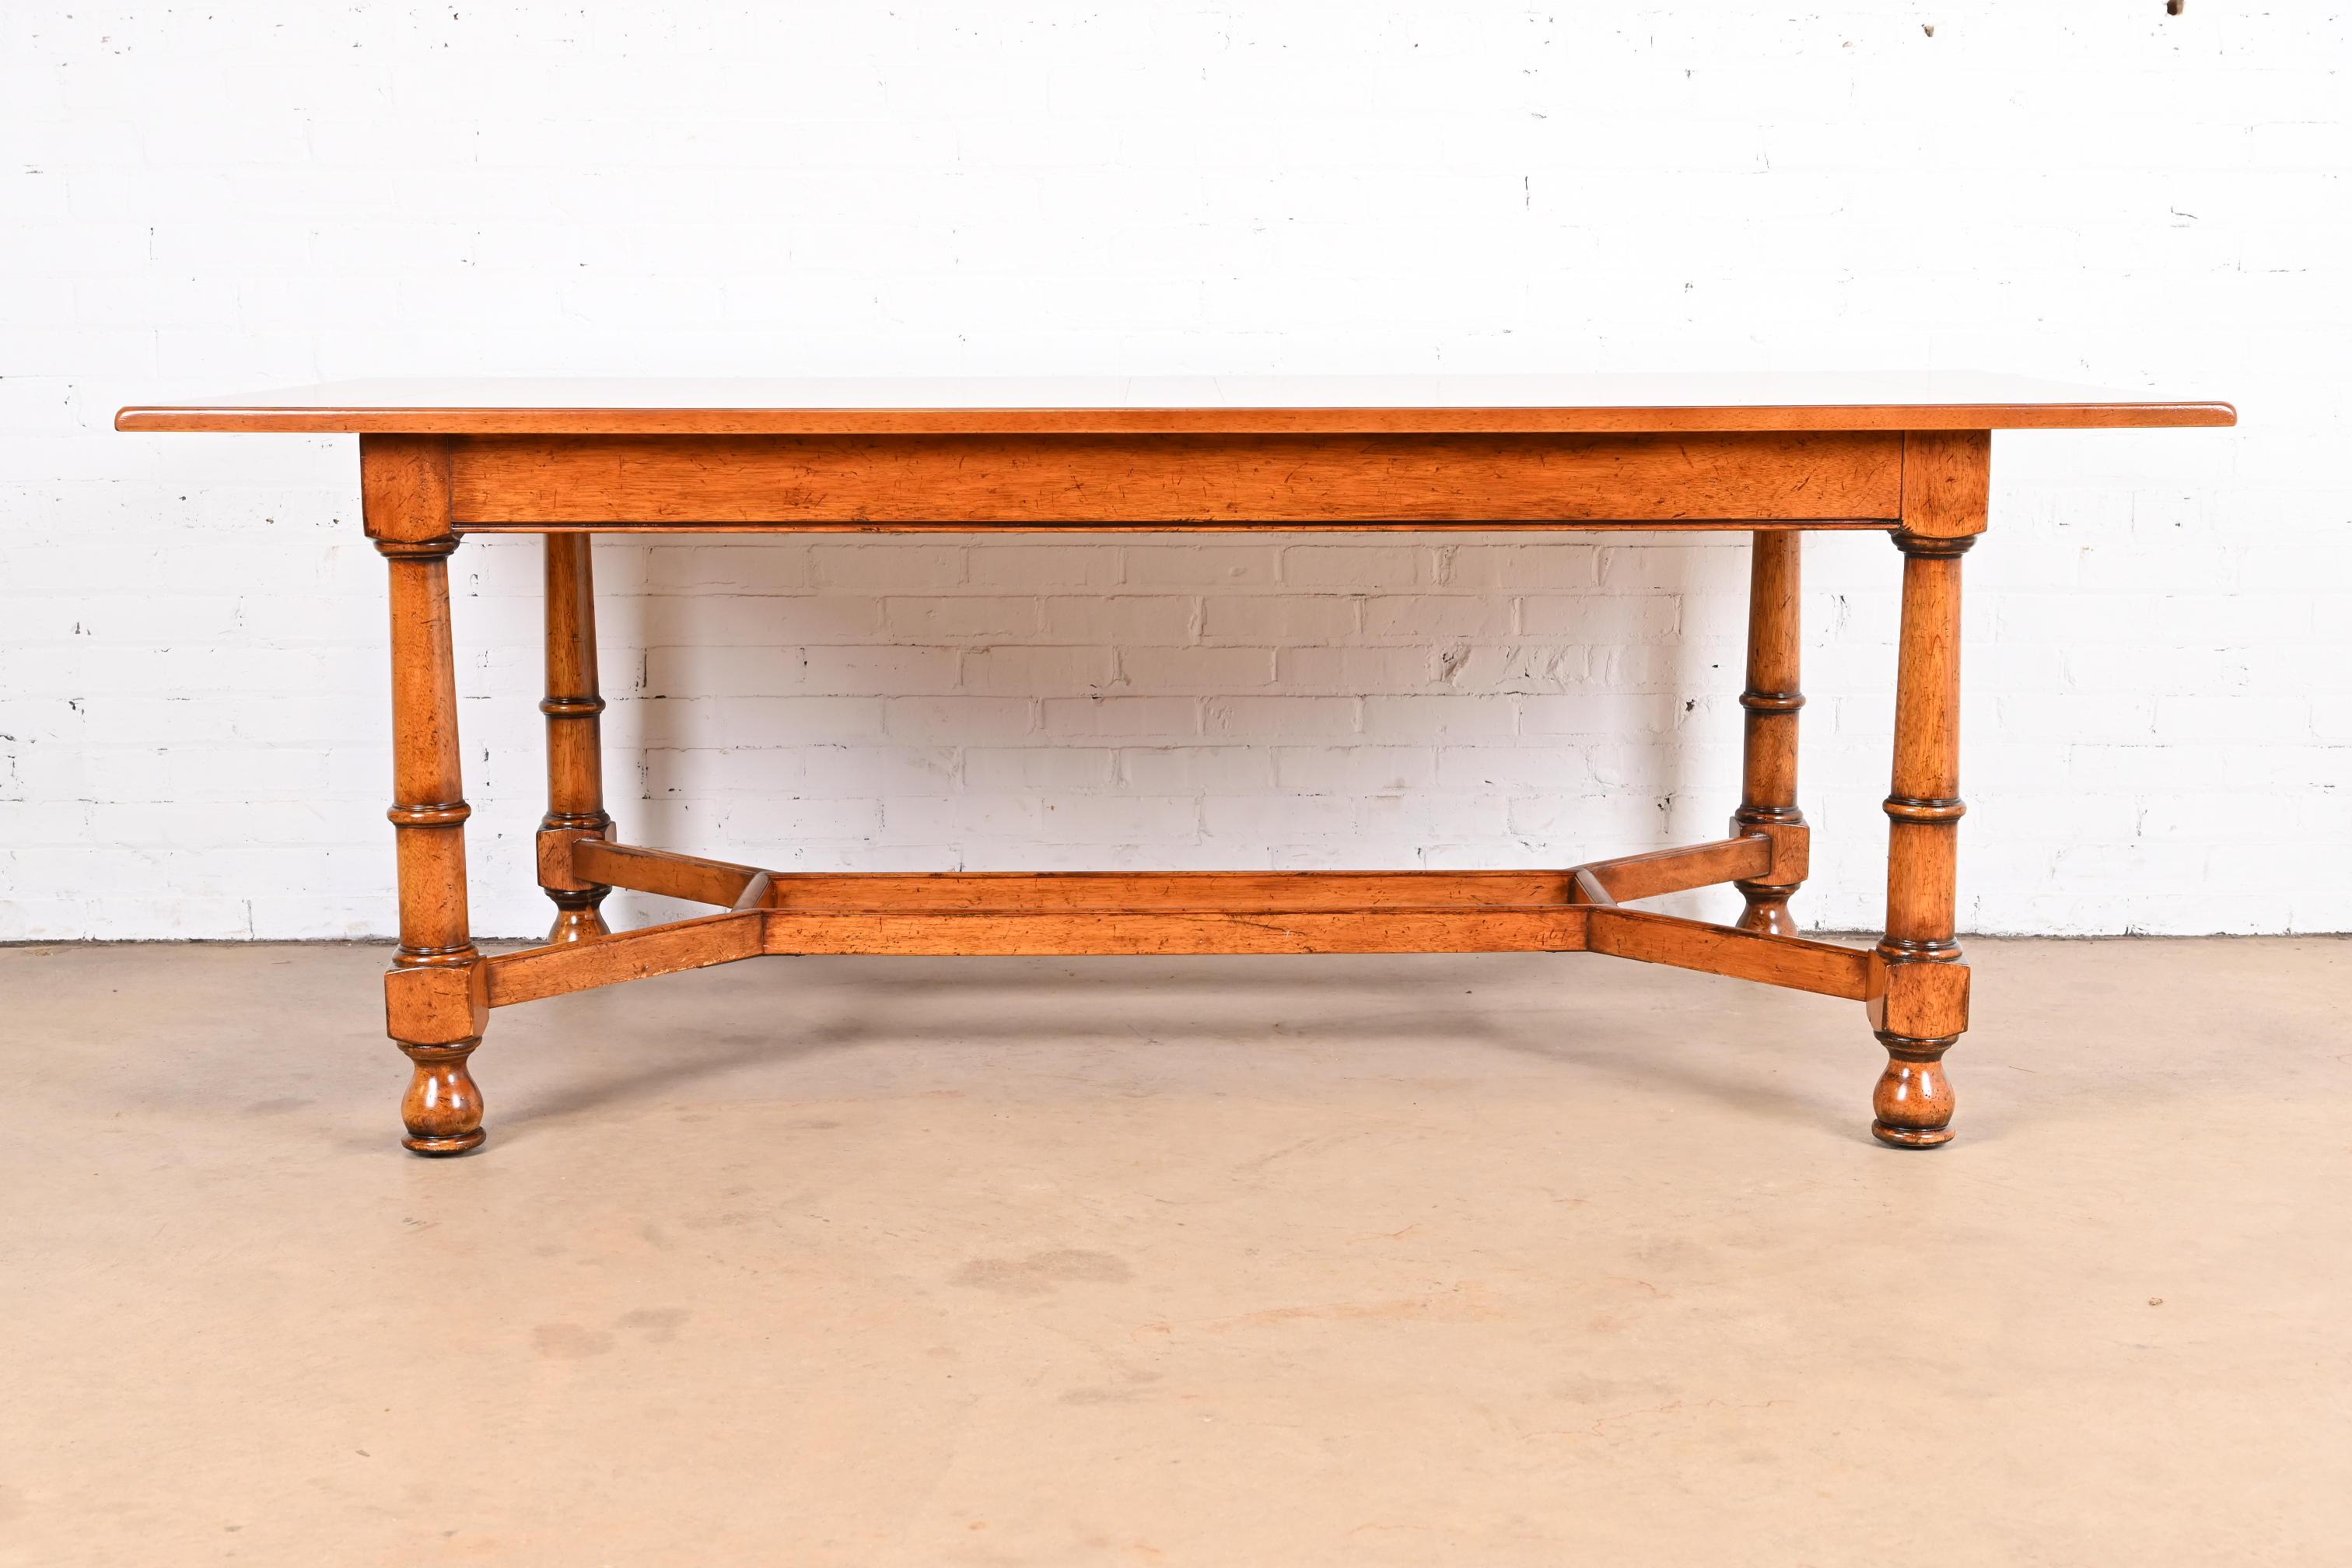 An exceptional French Country, French Provincial, or Rustic European style maple harvest dining table

By Baker Furniture, 